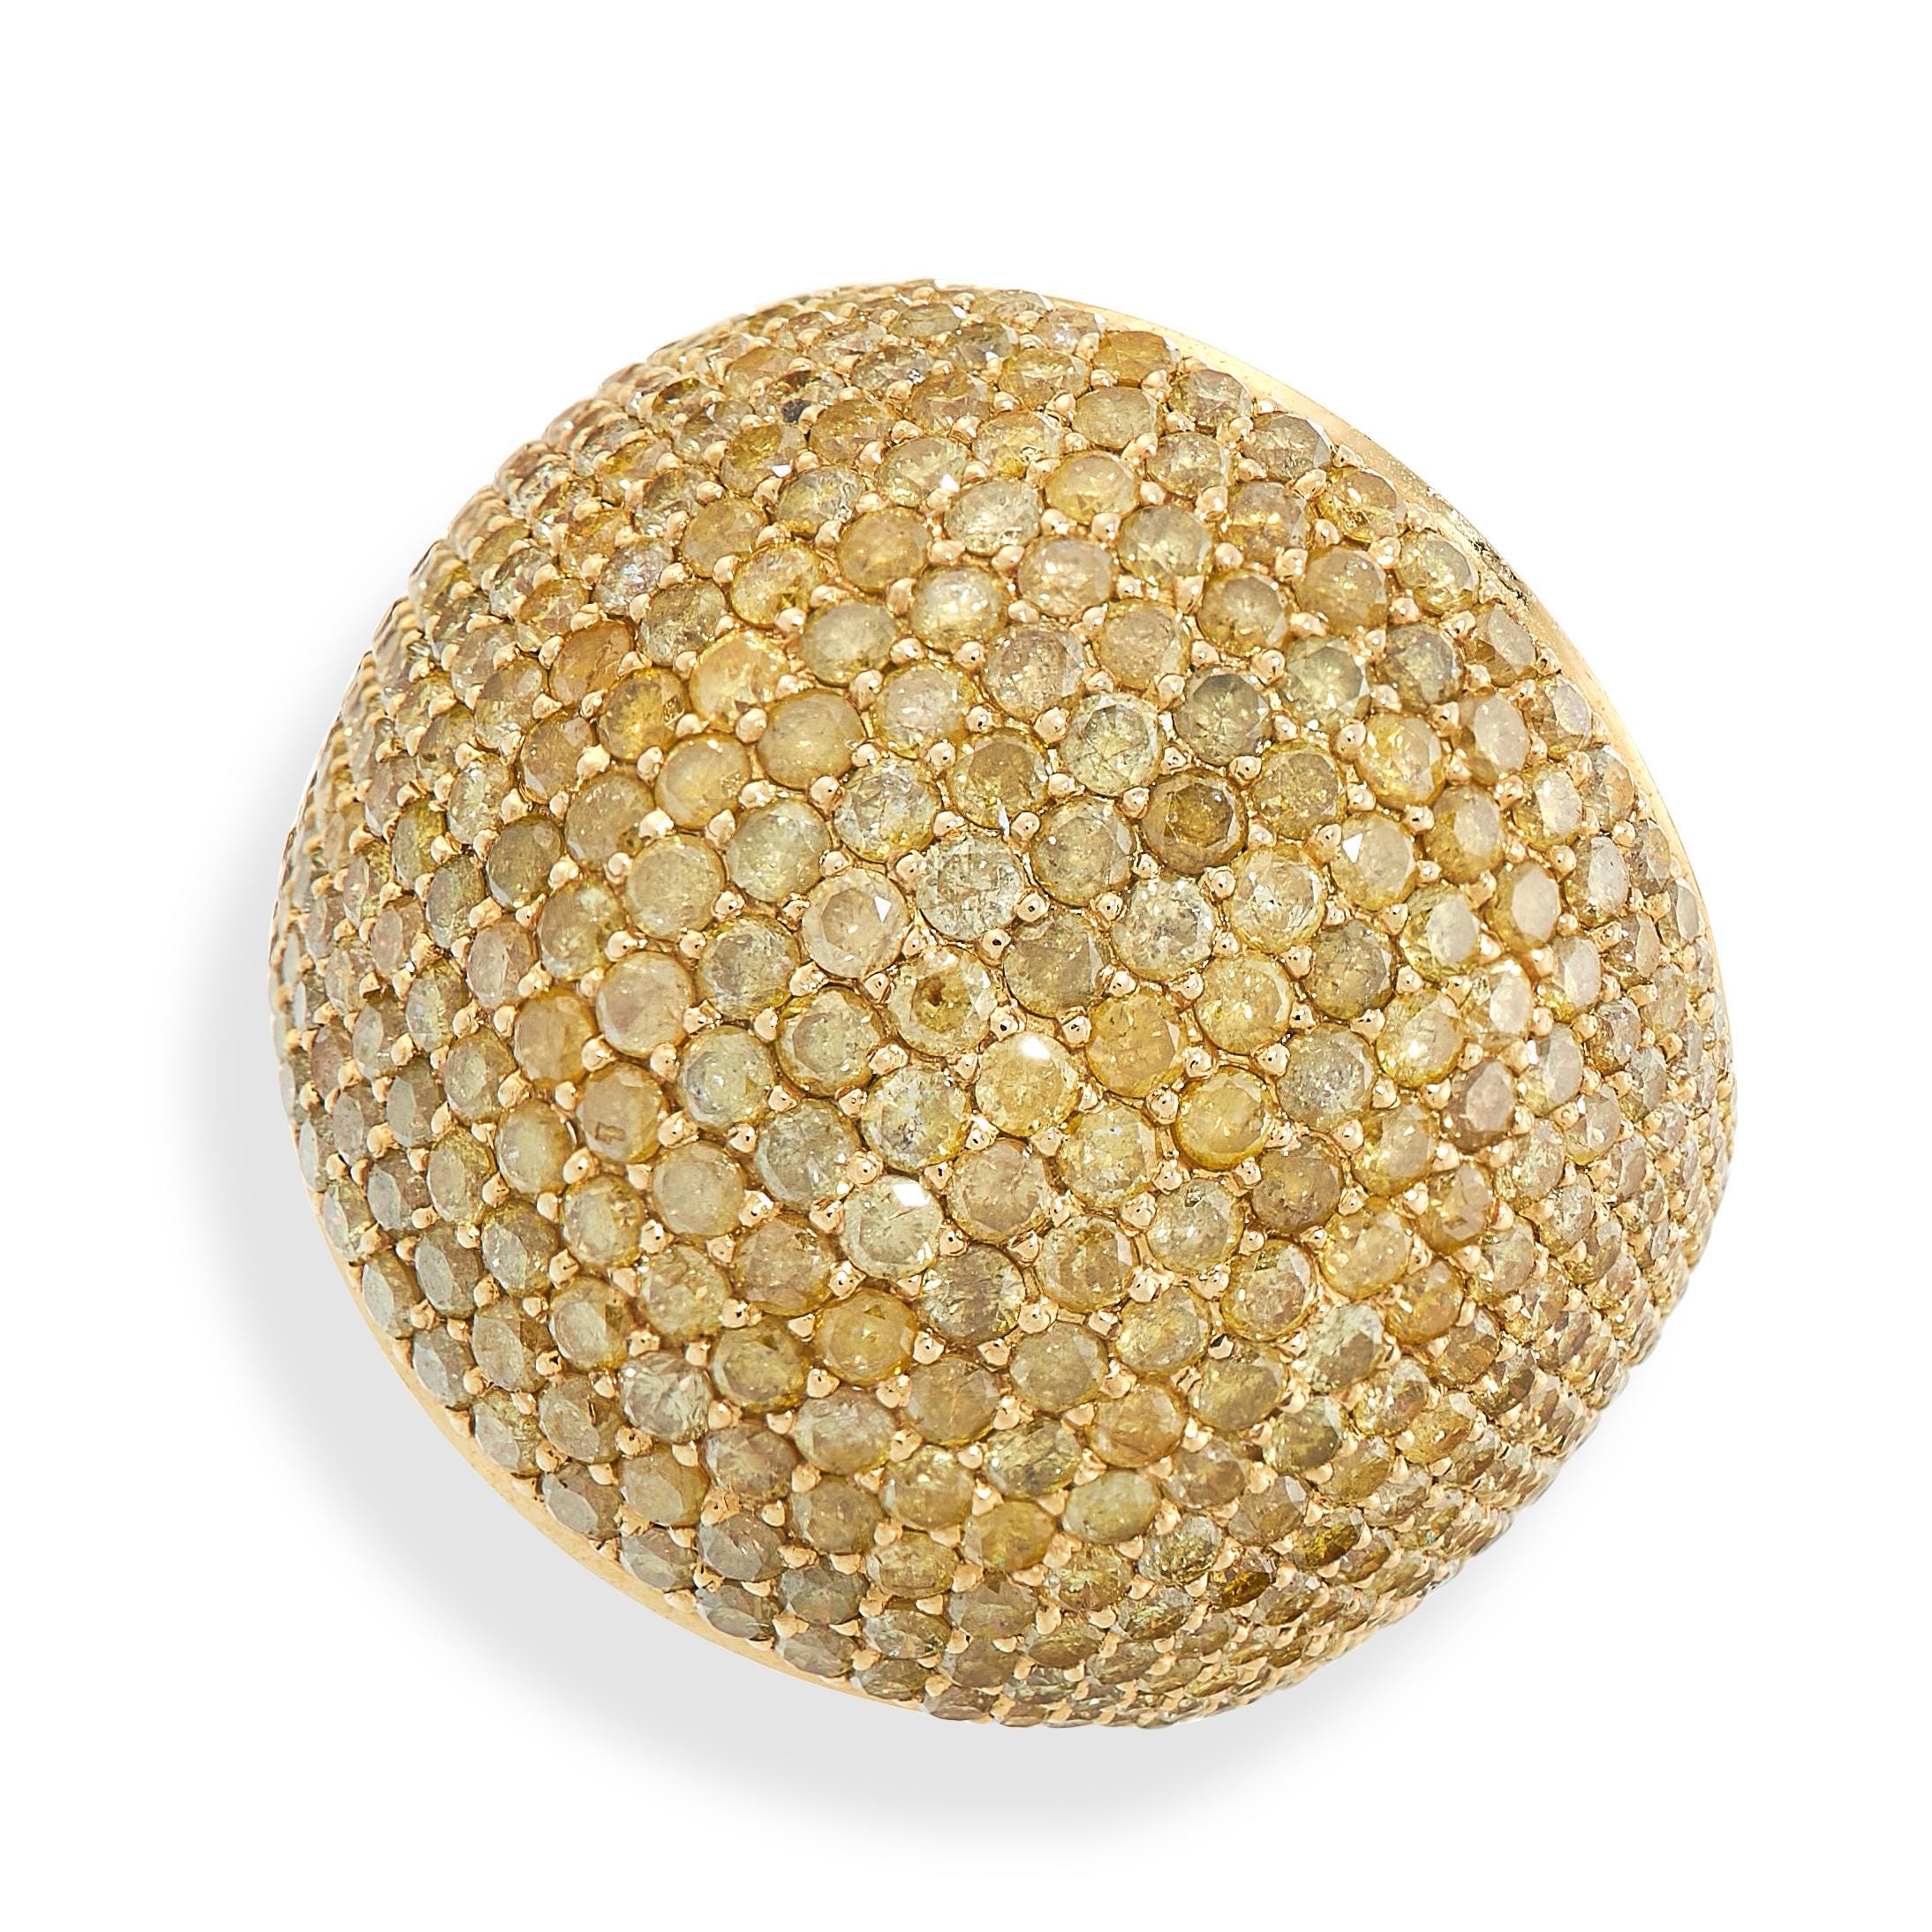 A YELLOW DIAMOND COCKTAIL RING of bombe design, pave set with round cut yellow diamonds to the domed